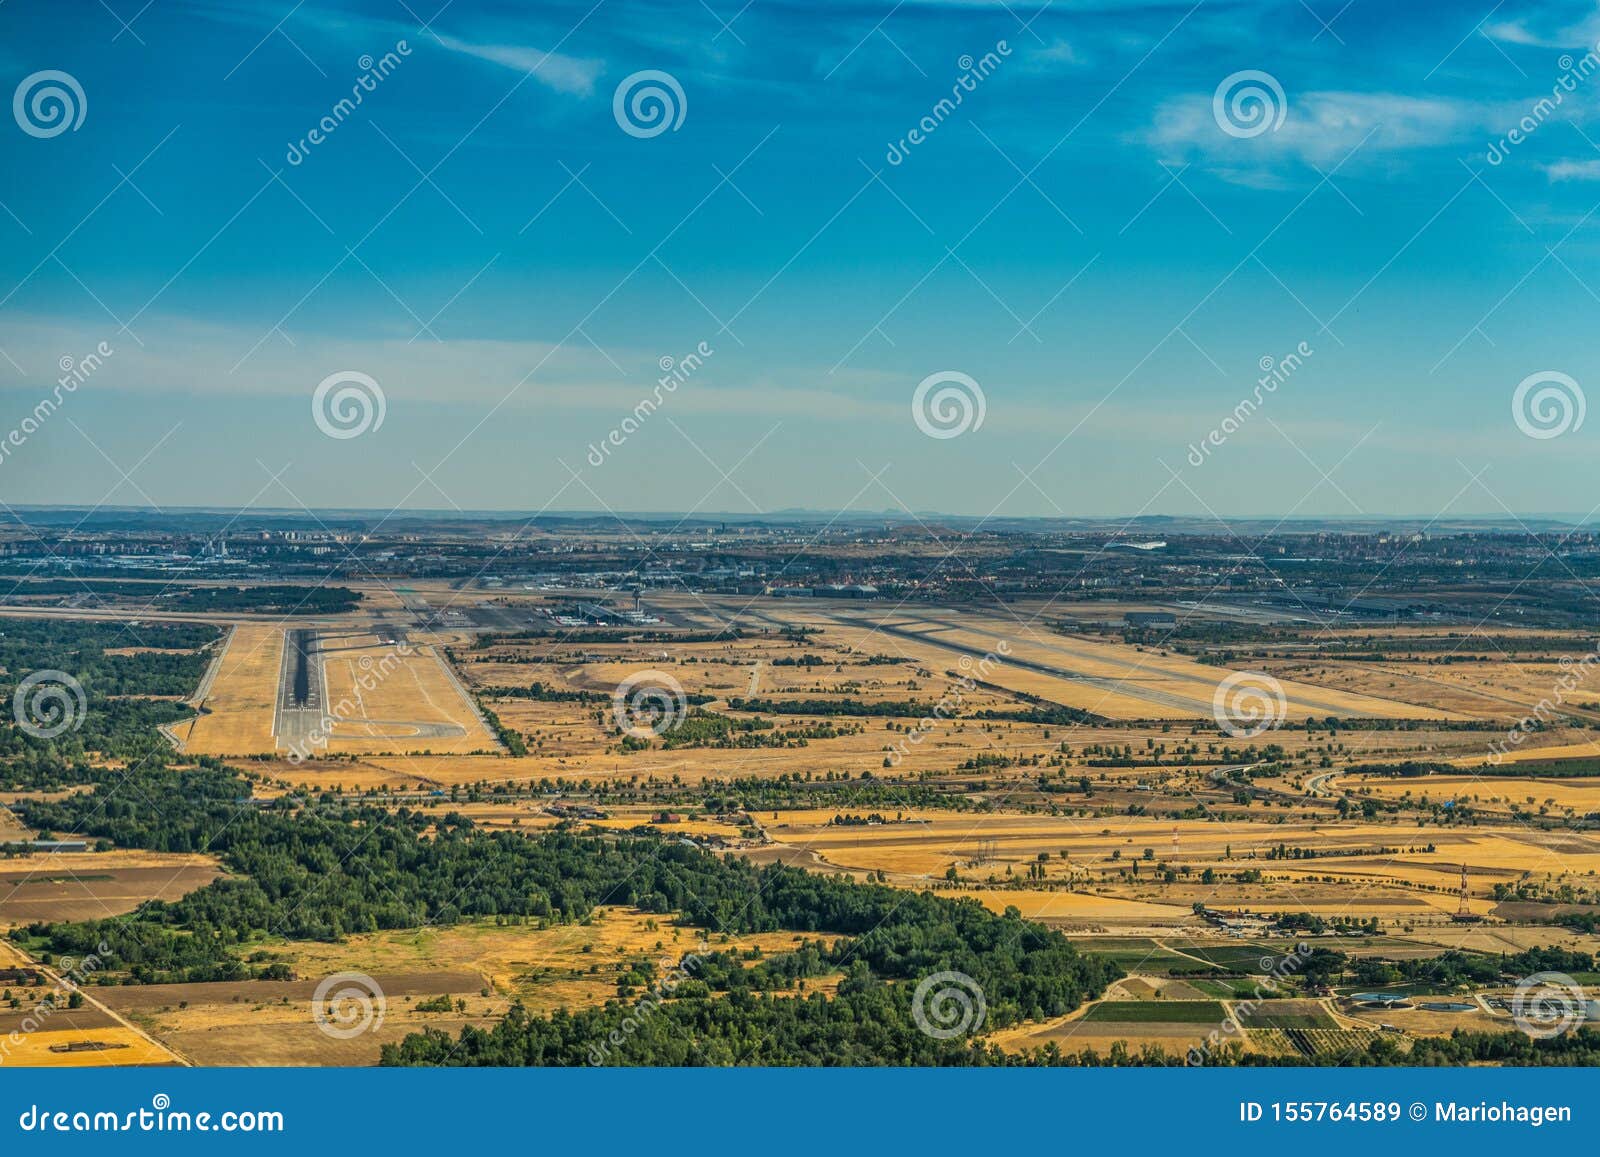 landscape around madrid barajas  international airport, spain, pilots view during approach - aerial view